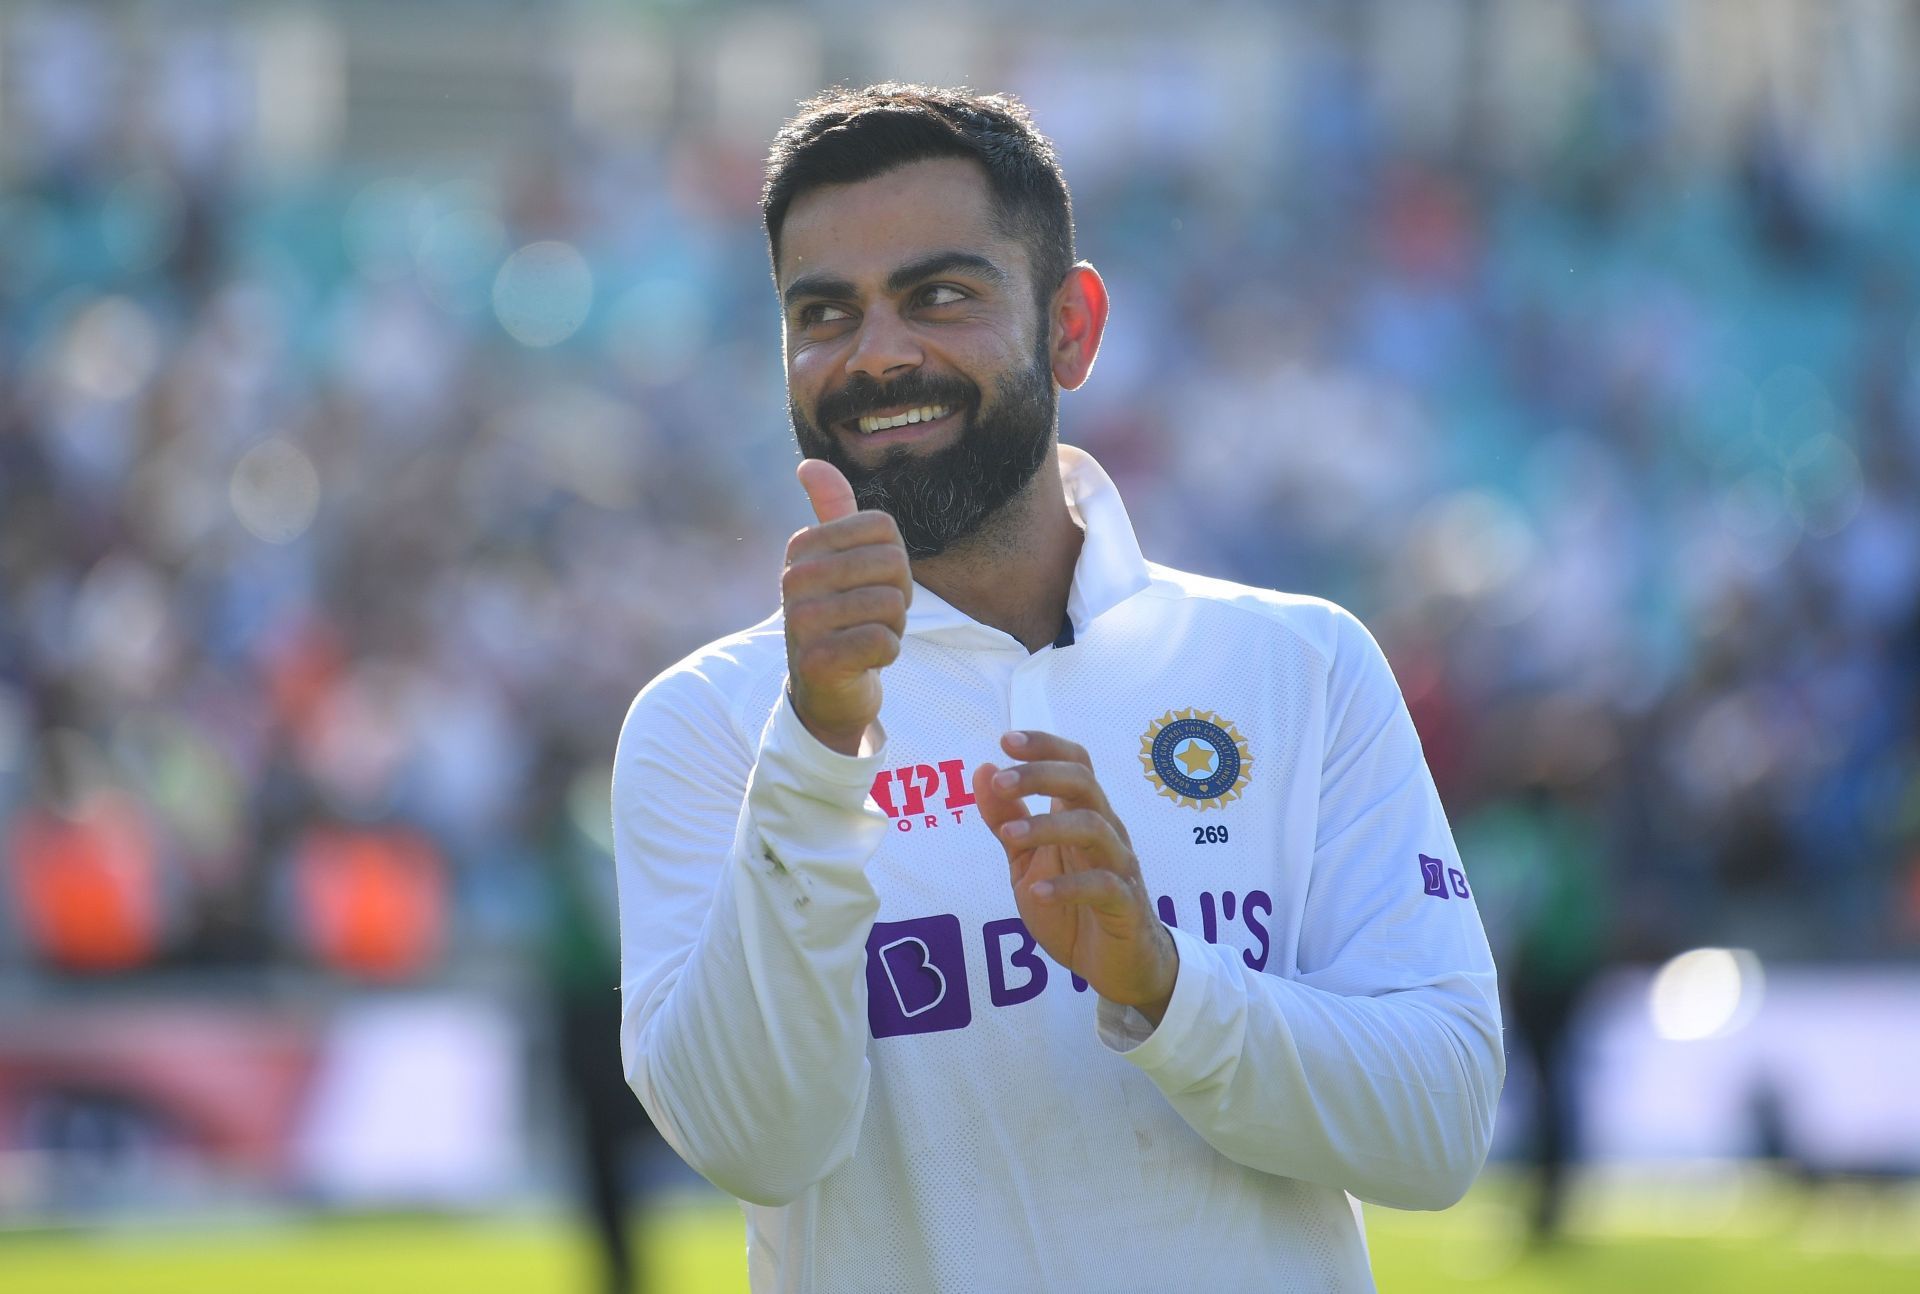 Virat Kohli scored a superb 79 in the ongoing Cape Town Test